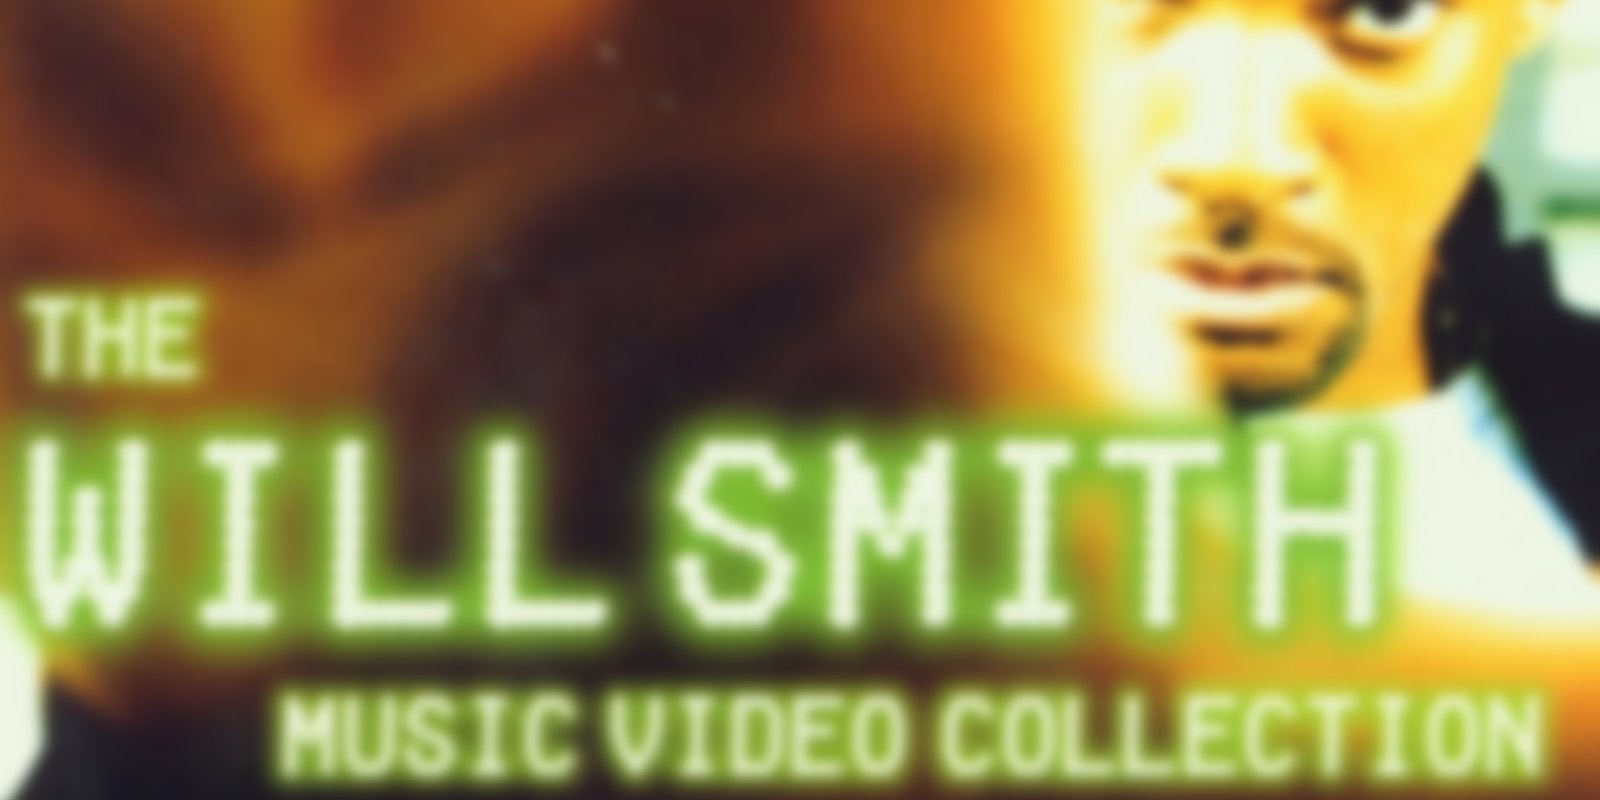 The Will Smith Music Video Collection